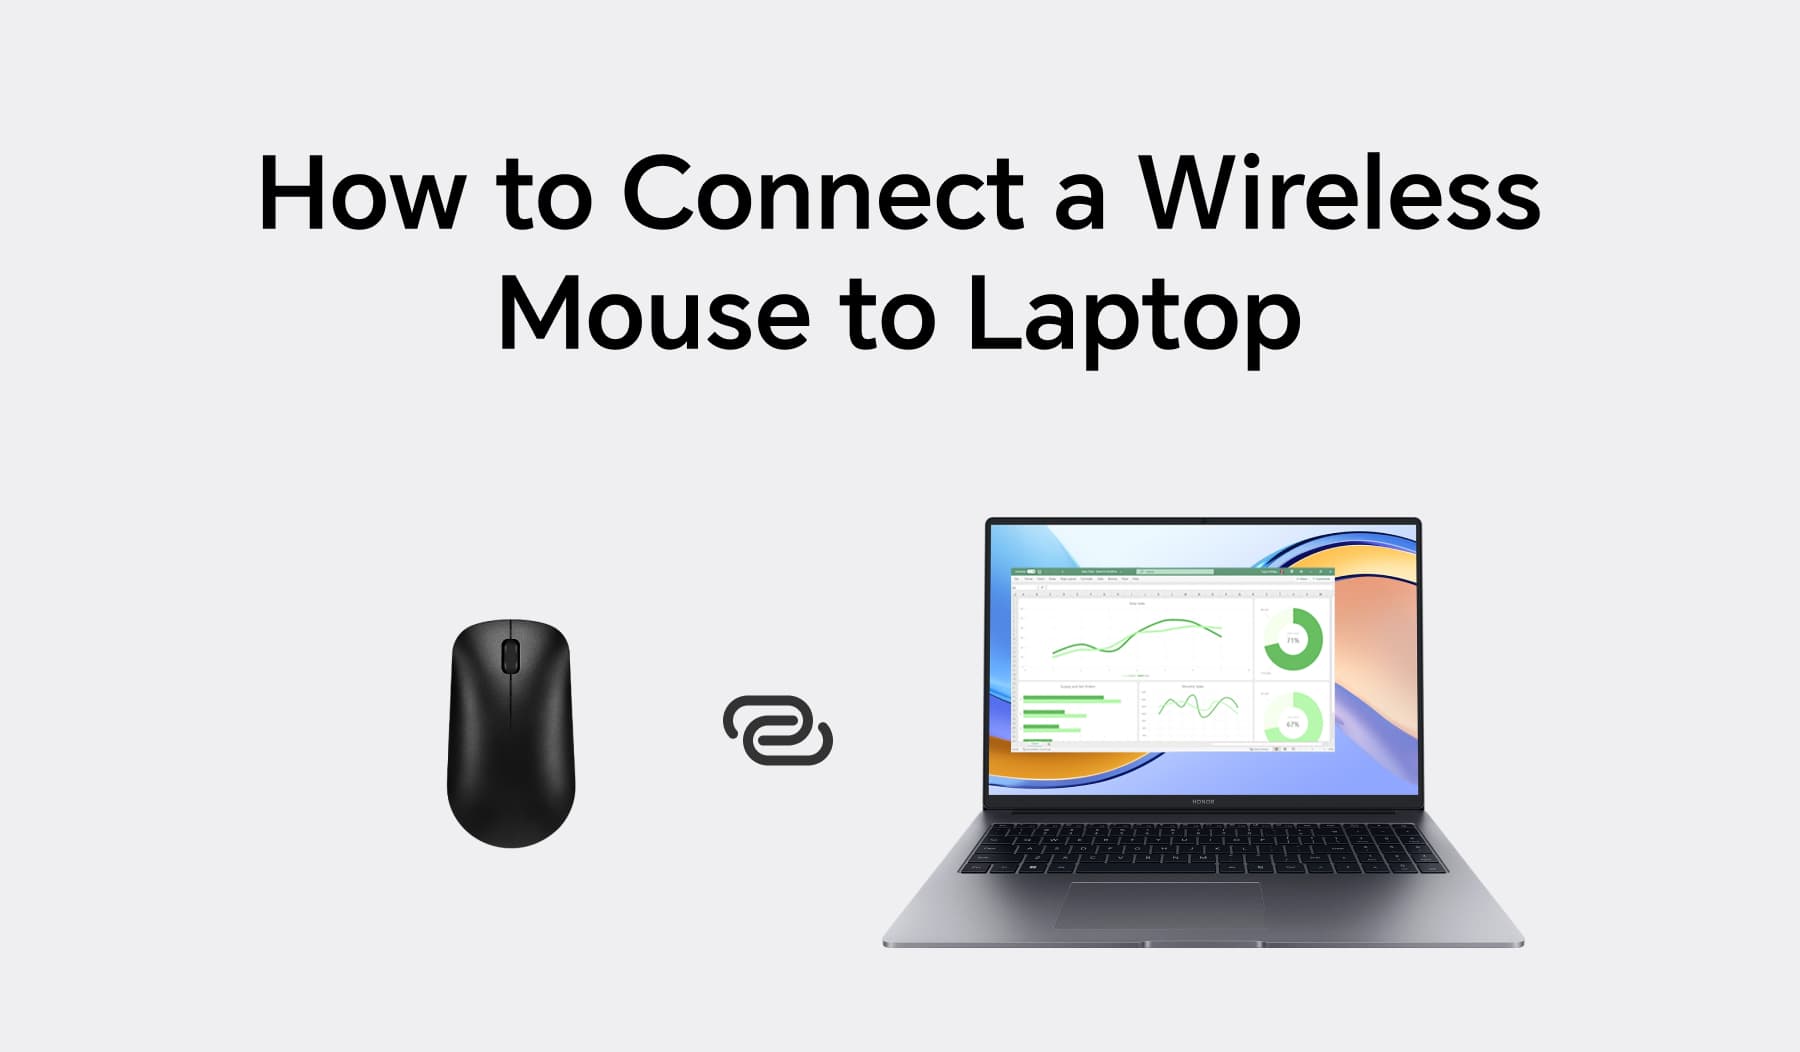 How to Connect a Wireless Mouse to Laptop